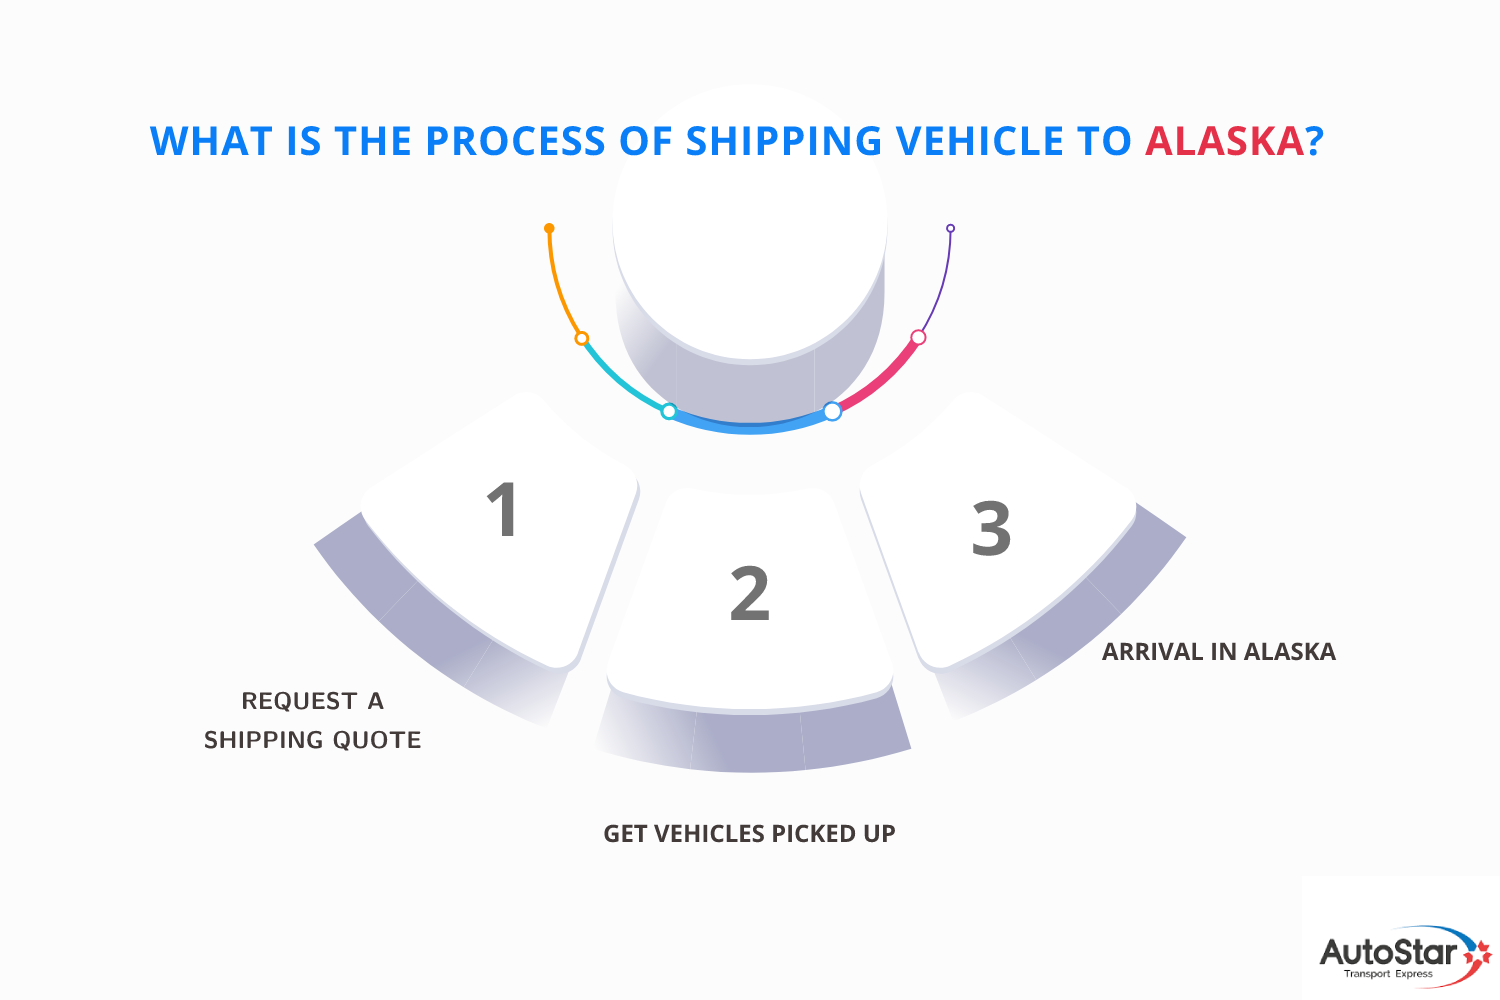 What is the Process of Shipping Vehicle to Alaska